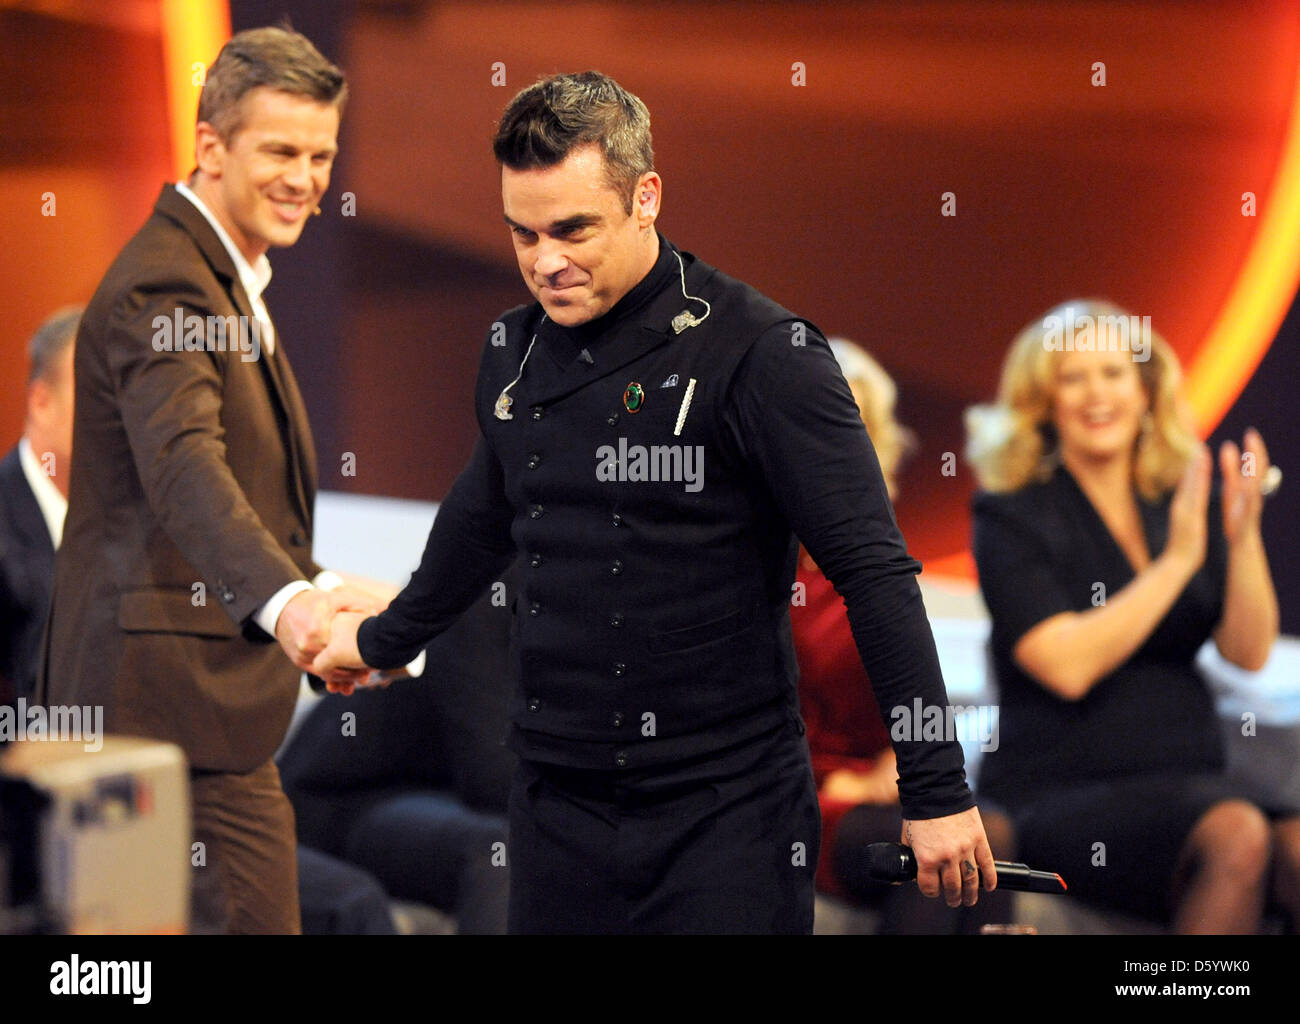 German actress Barbara Schoeneberger (L) and German television host Markus Lanz (R) talk to British singer Robbie Williams (C) during the German television game show 'Wetten Das...? (Wanna bet...?), hosted by Markus Lanz (L)  at the OVB-Arena in Bremen, Germany 3 November 2012. Photo:  Ingo Wagner Stock Photo